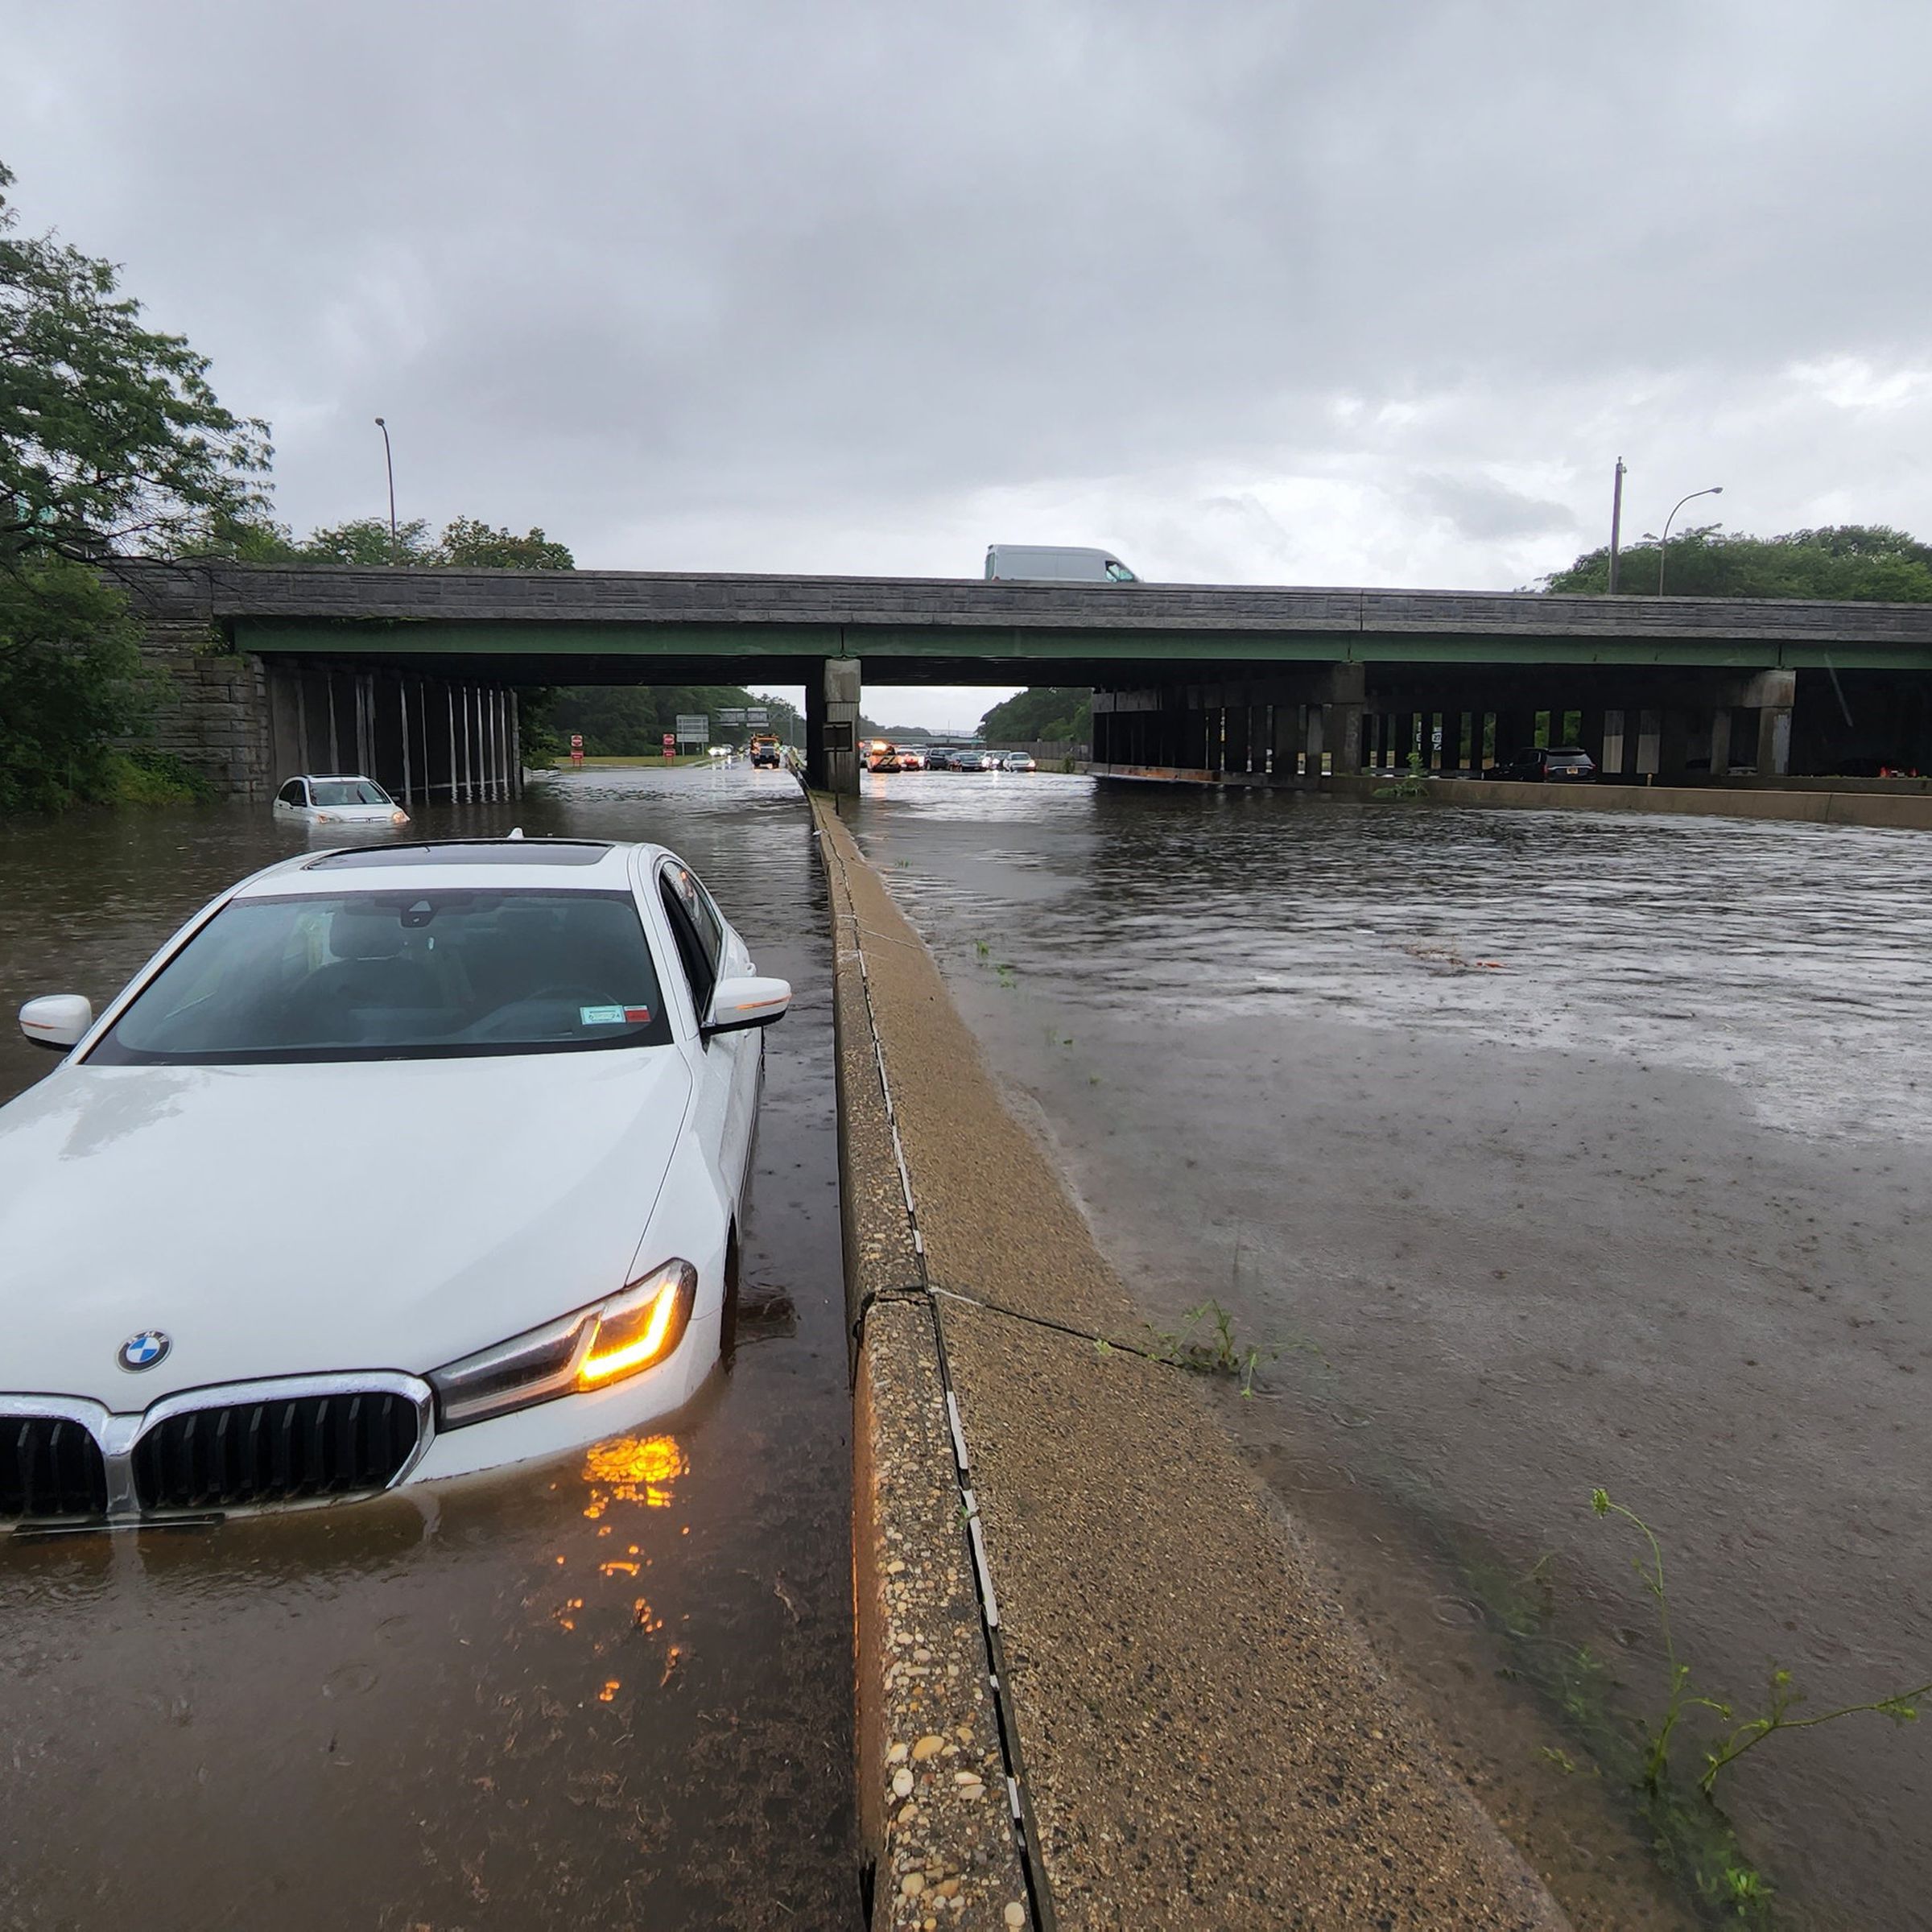 Cars are stranded in a flood on Sunrise Highway at the Heckscher State Parkway interchange in Islip Terrace, New York on July 16, 2023